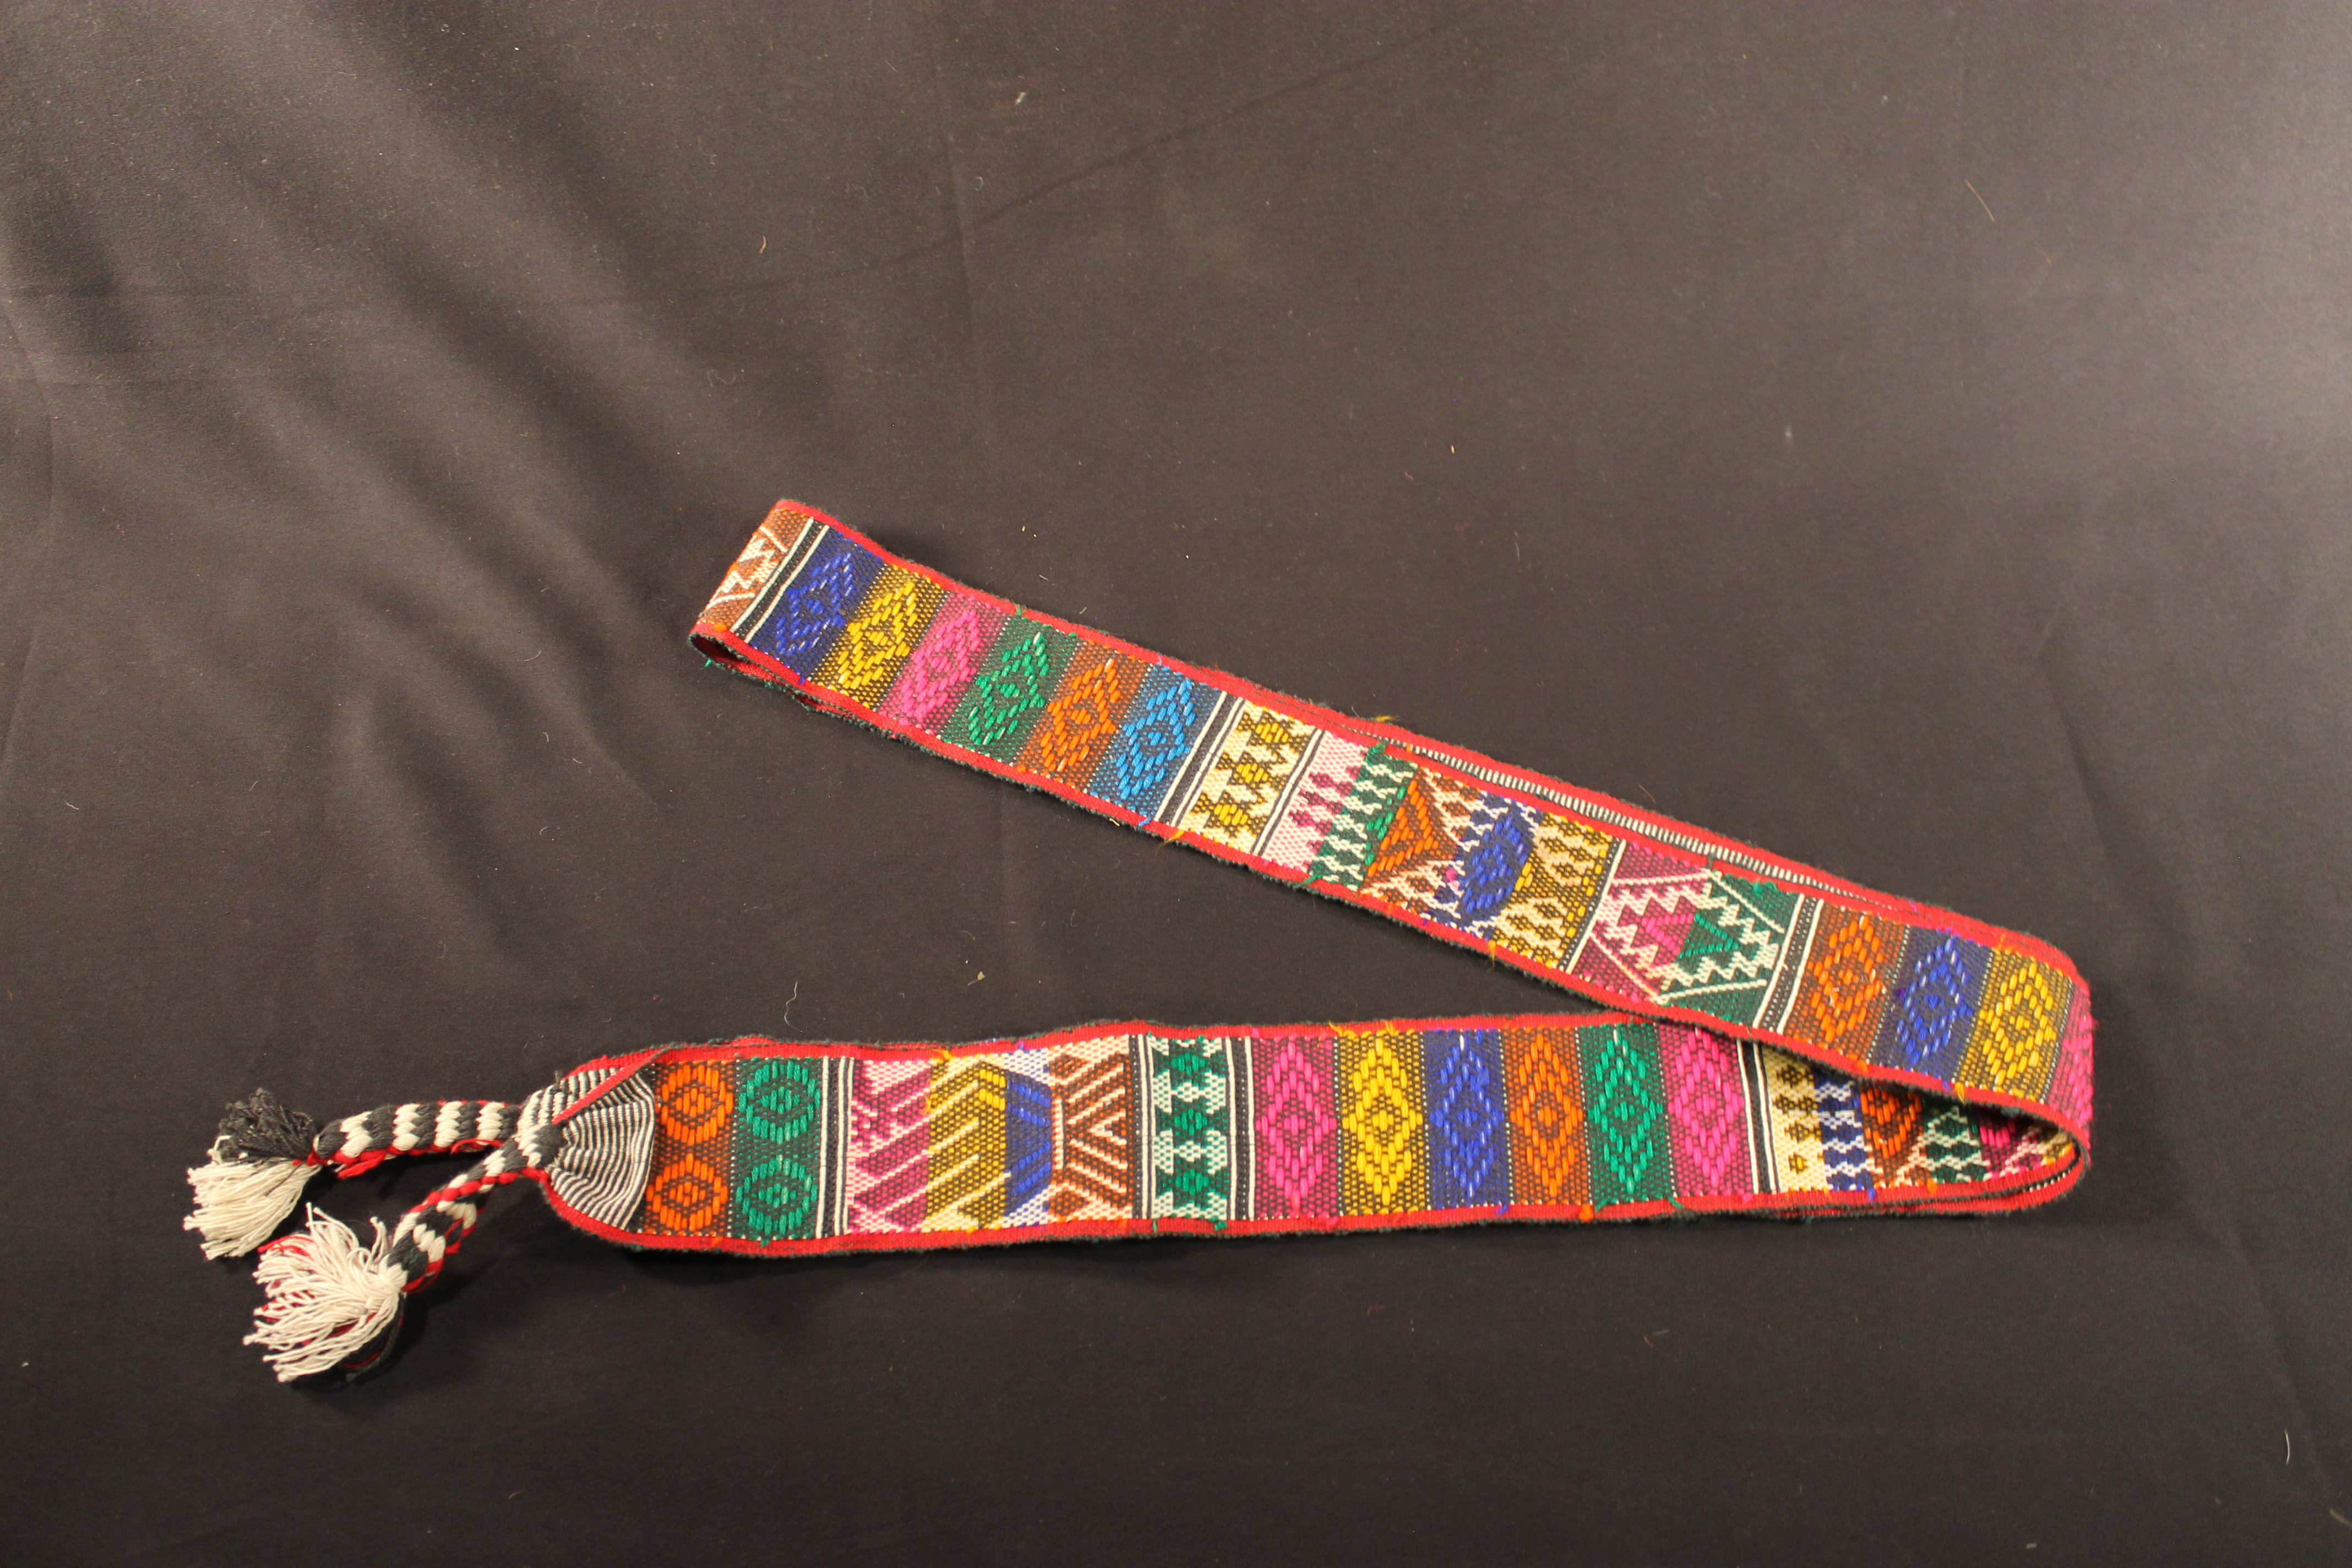 Woven sash that shows designs consisting of geometric shapes with depictions of animal and human figures. Red, pink, yellow, green, orange, blue, aqua threads are used throughout designs. On either side of the sash are braided tassels